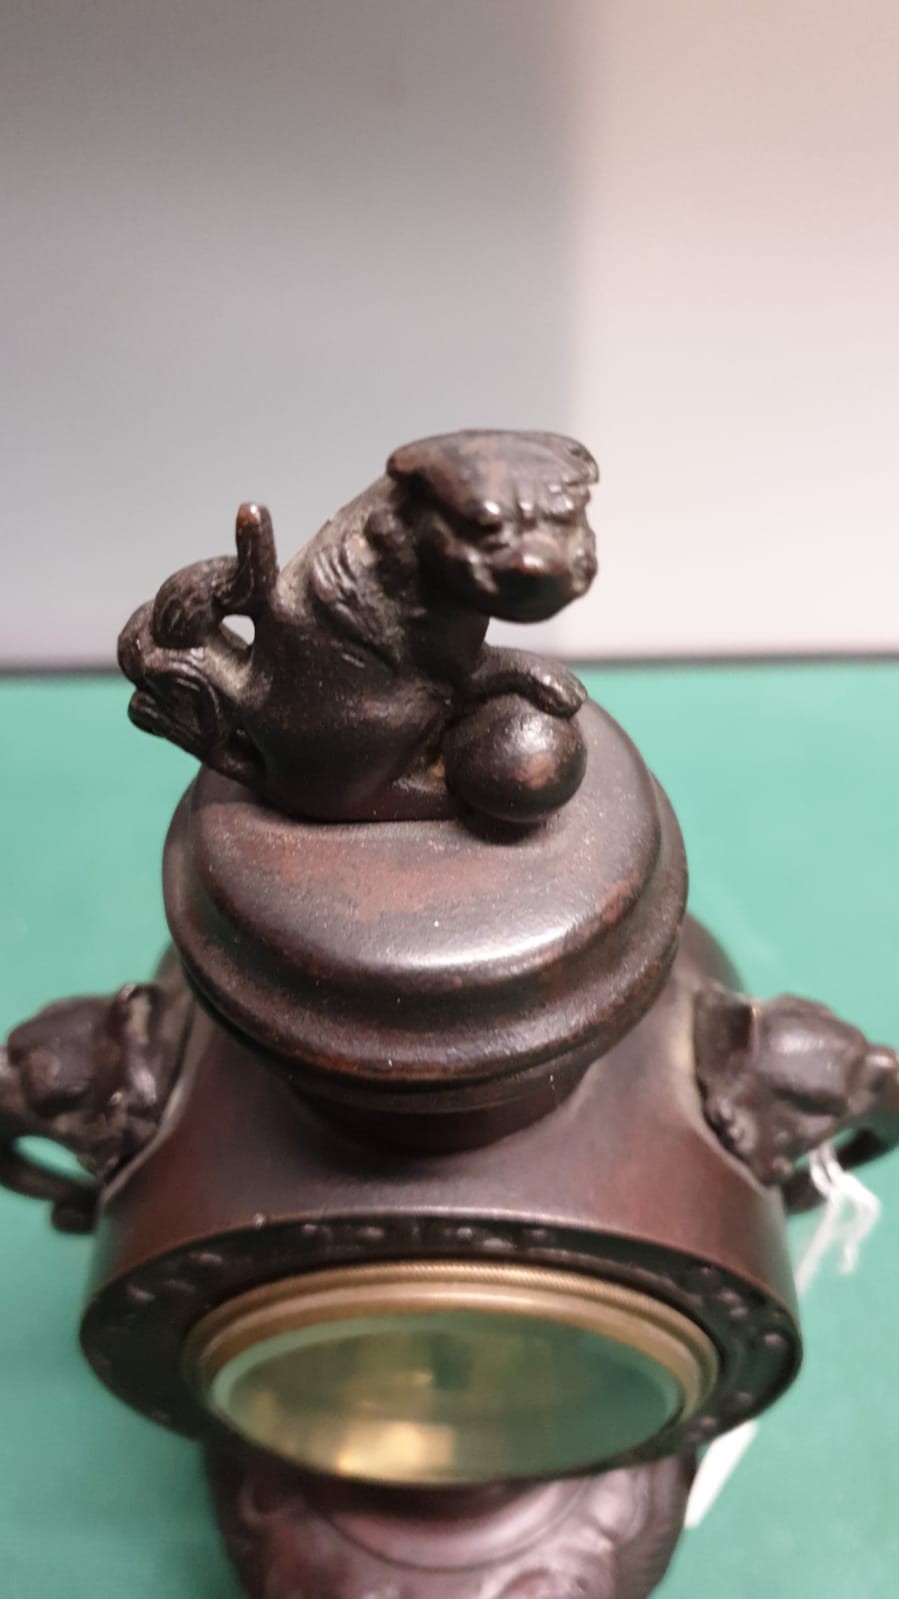 Stunning Bronze Oriental Theme Clock With Dog Of Wu Finial Leading to Elephant Handles Gilded Face 4 - Image 2 of 4